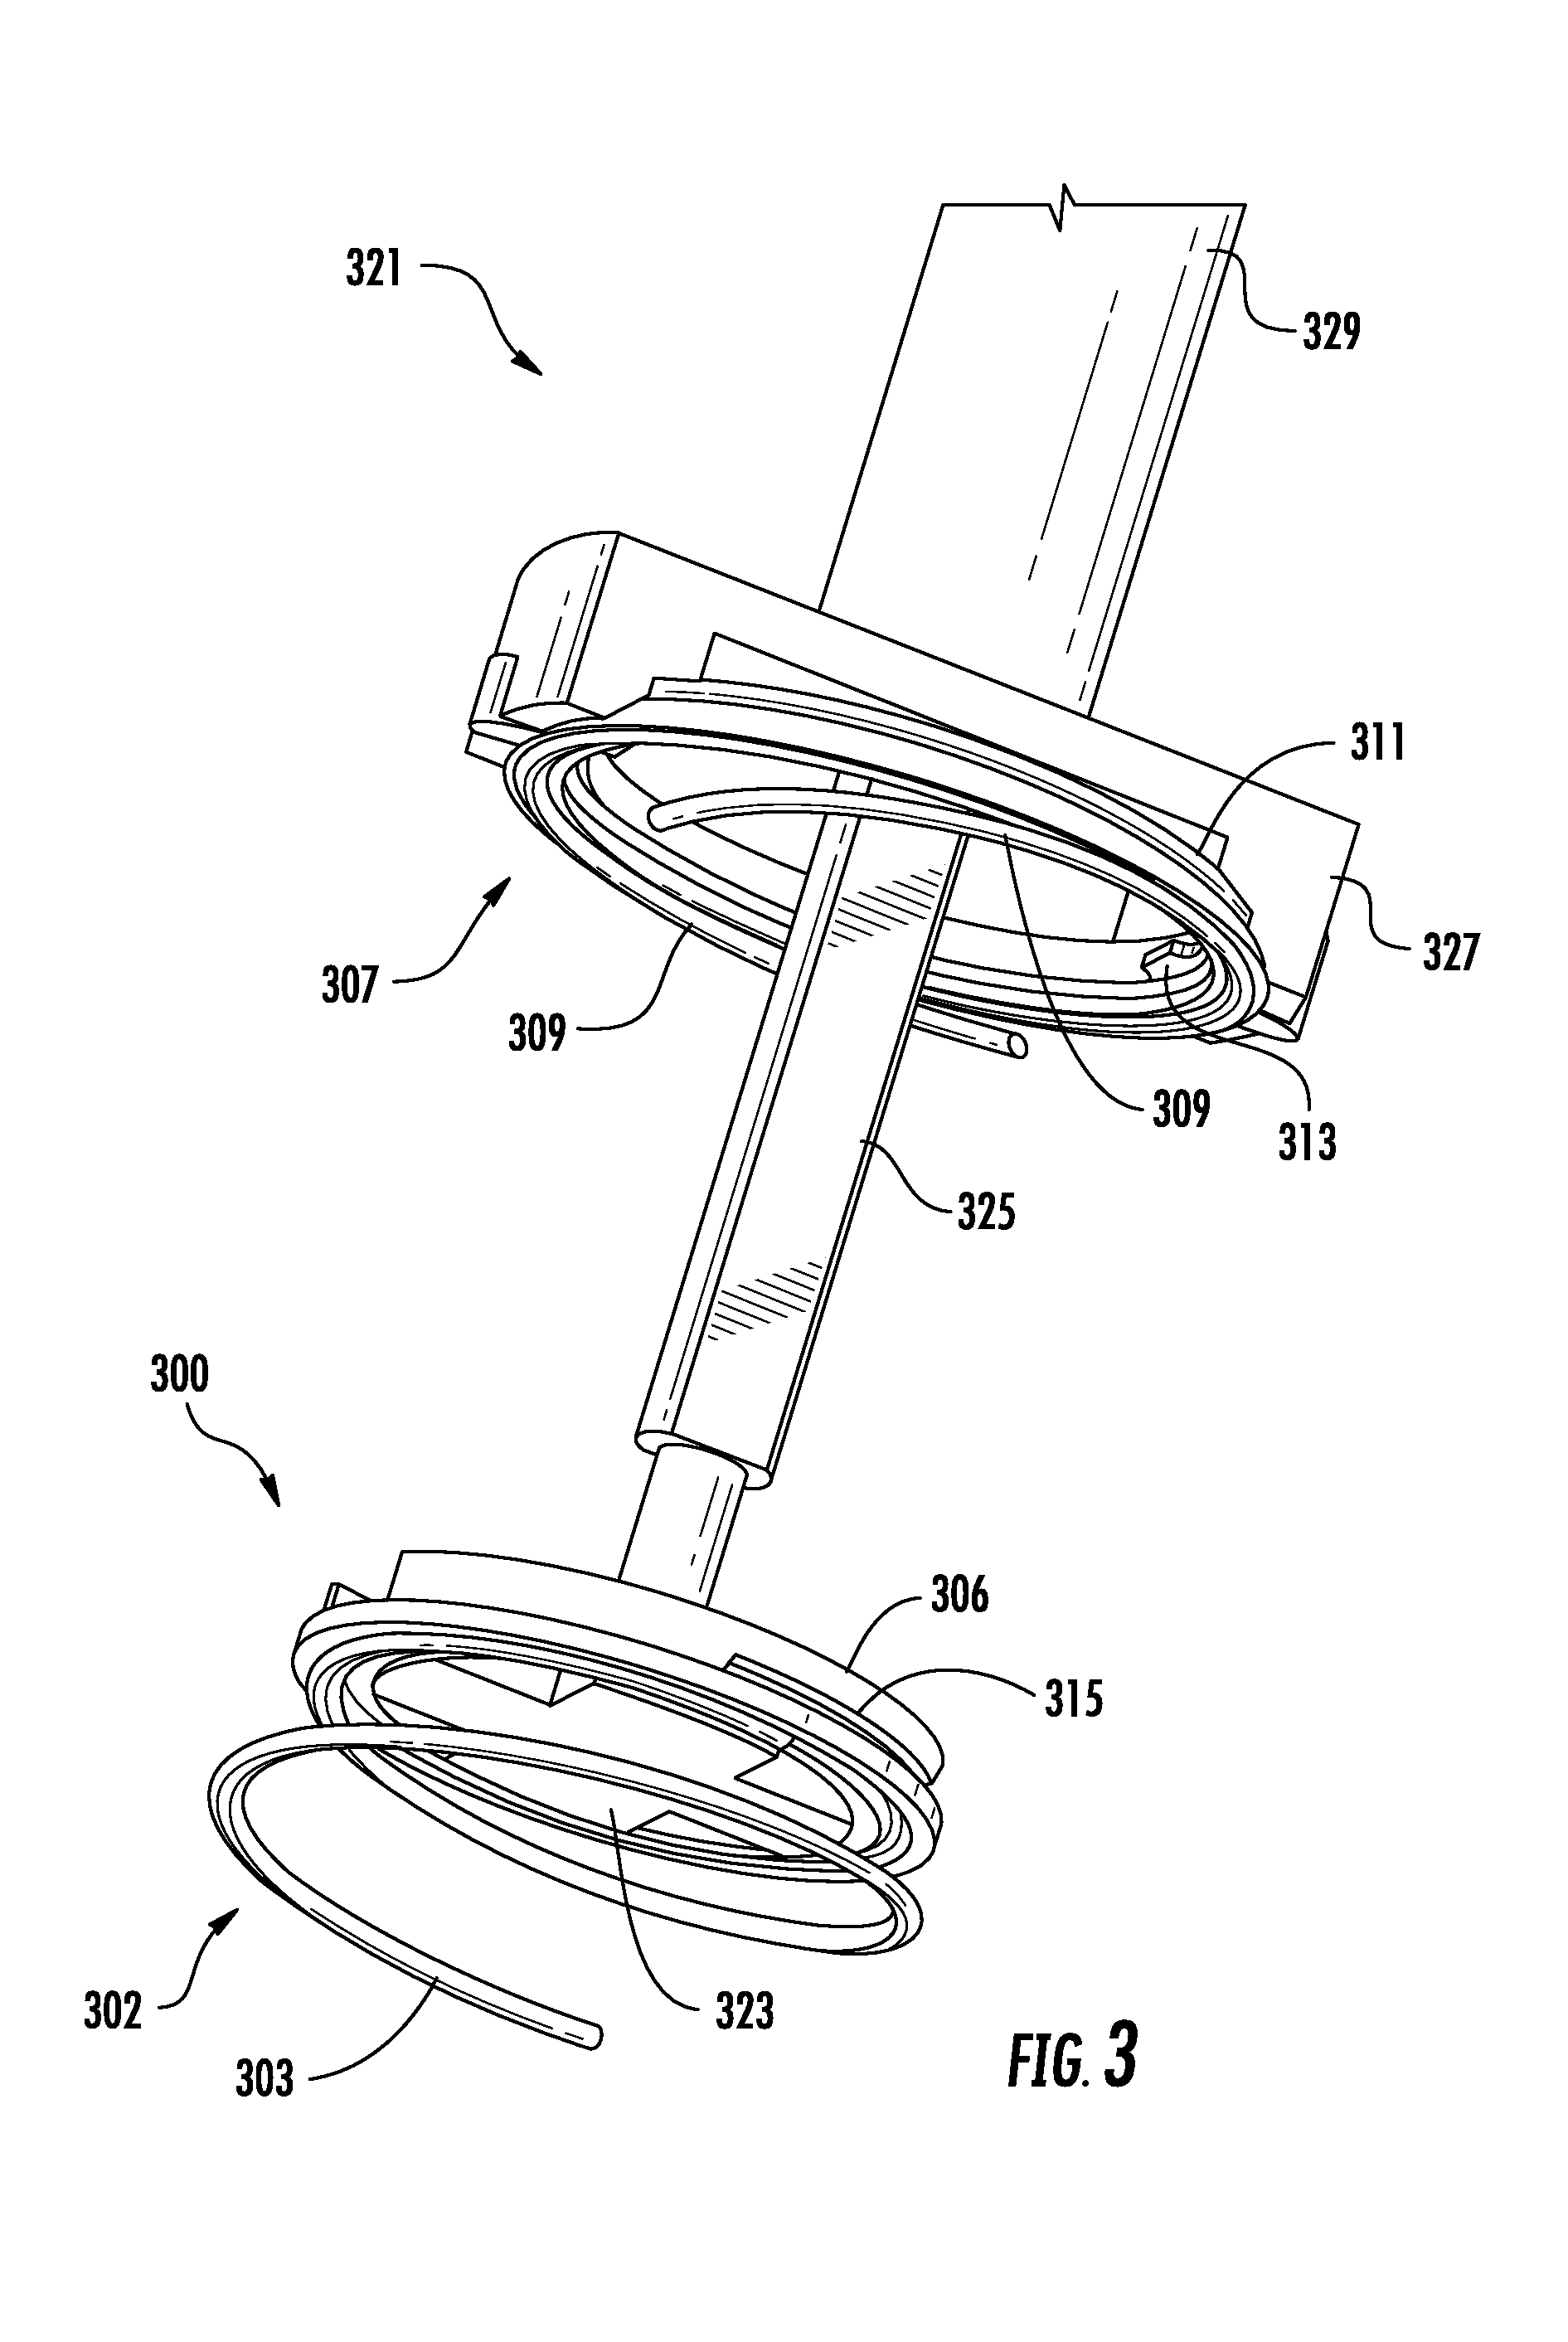 Apical Connectors and Instruments for Use in a Heart Wall